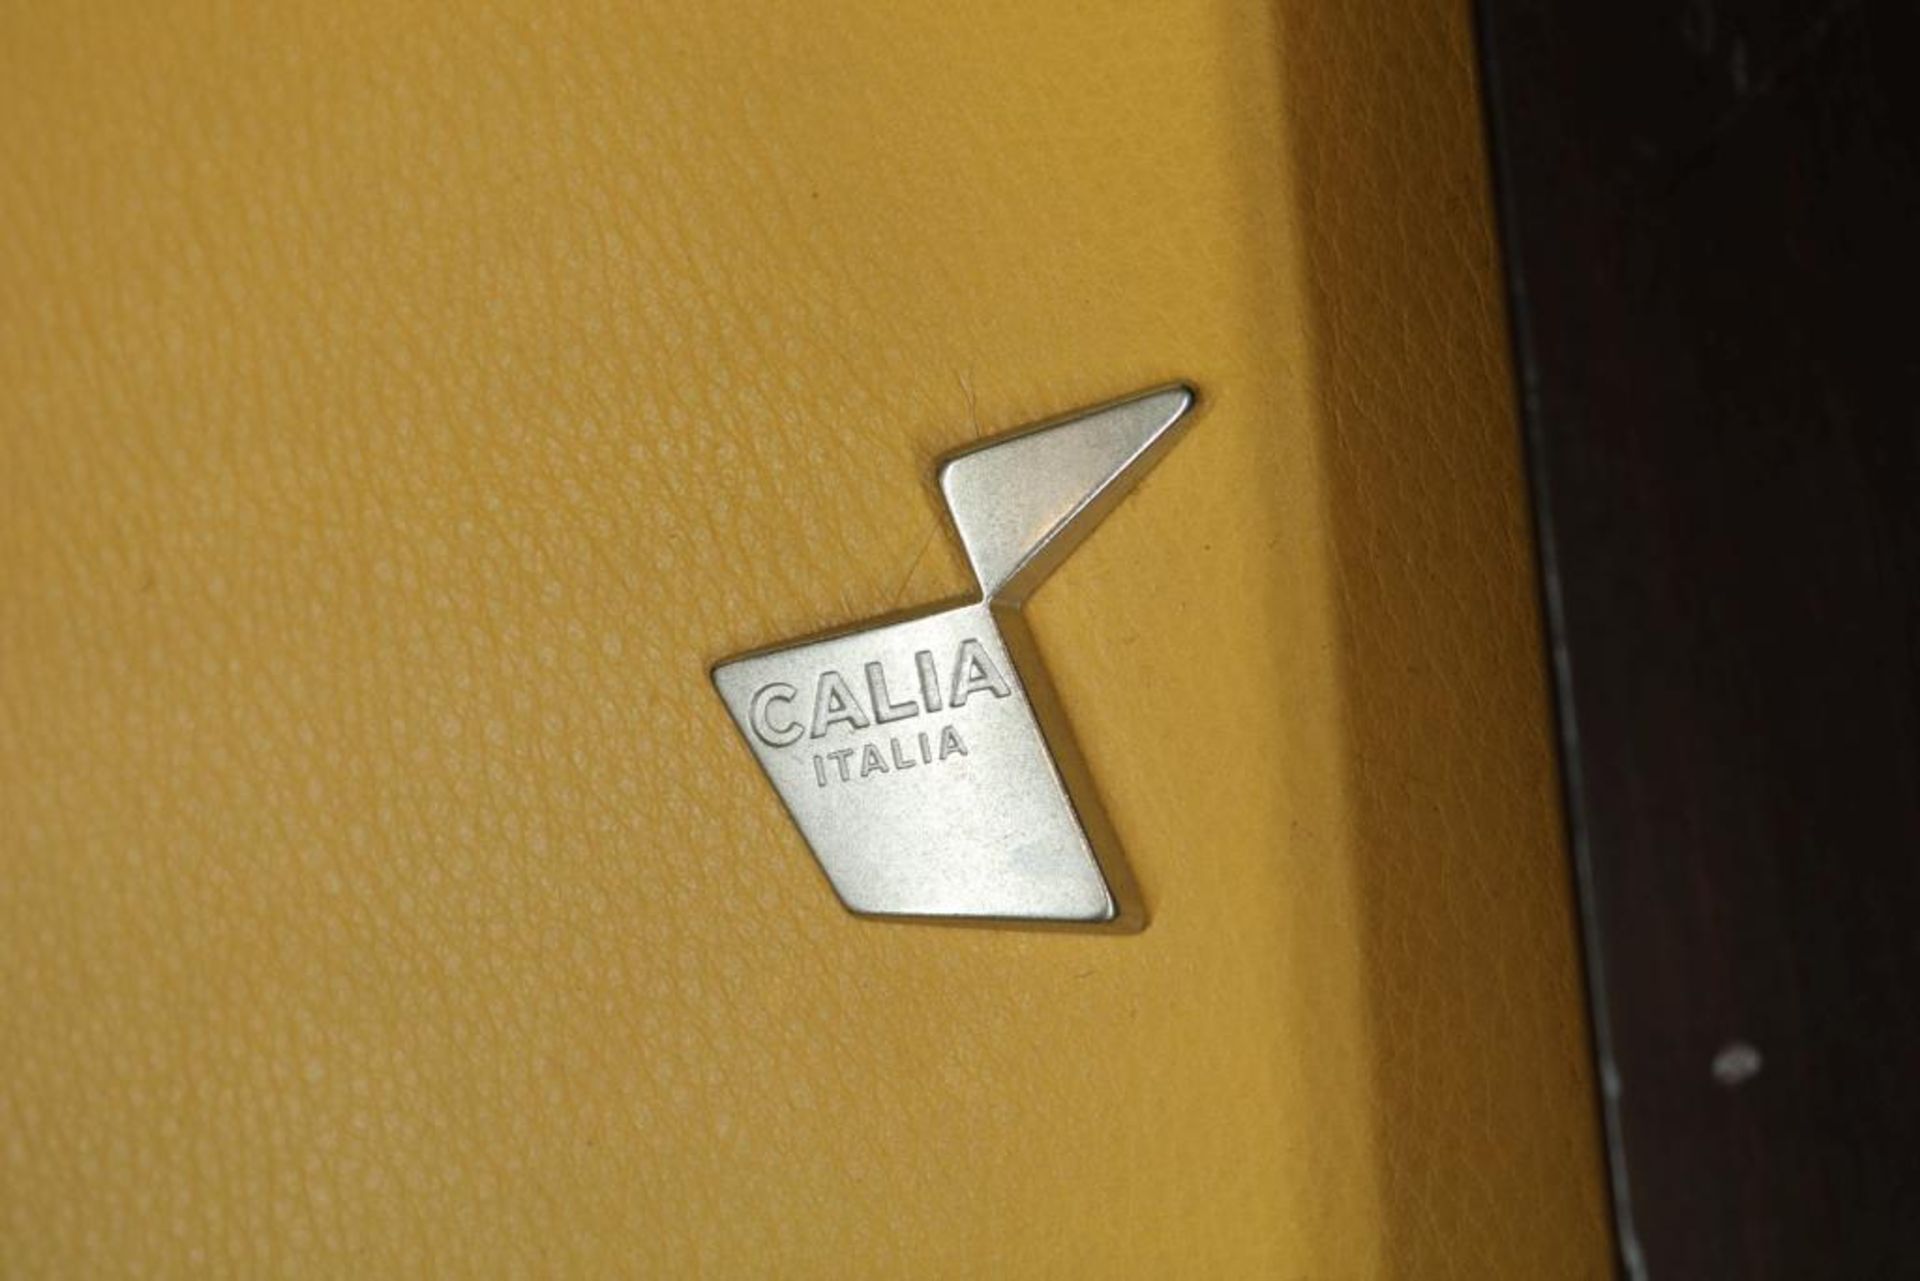 Set design chairs with ocher yellow leather upholstery and wooden armrests, Calia Italy label.Stel - Bild 3 aus 5